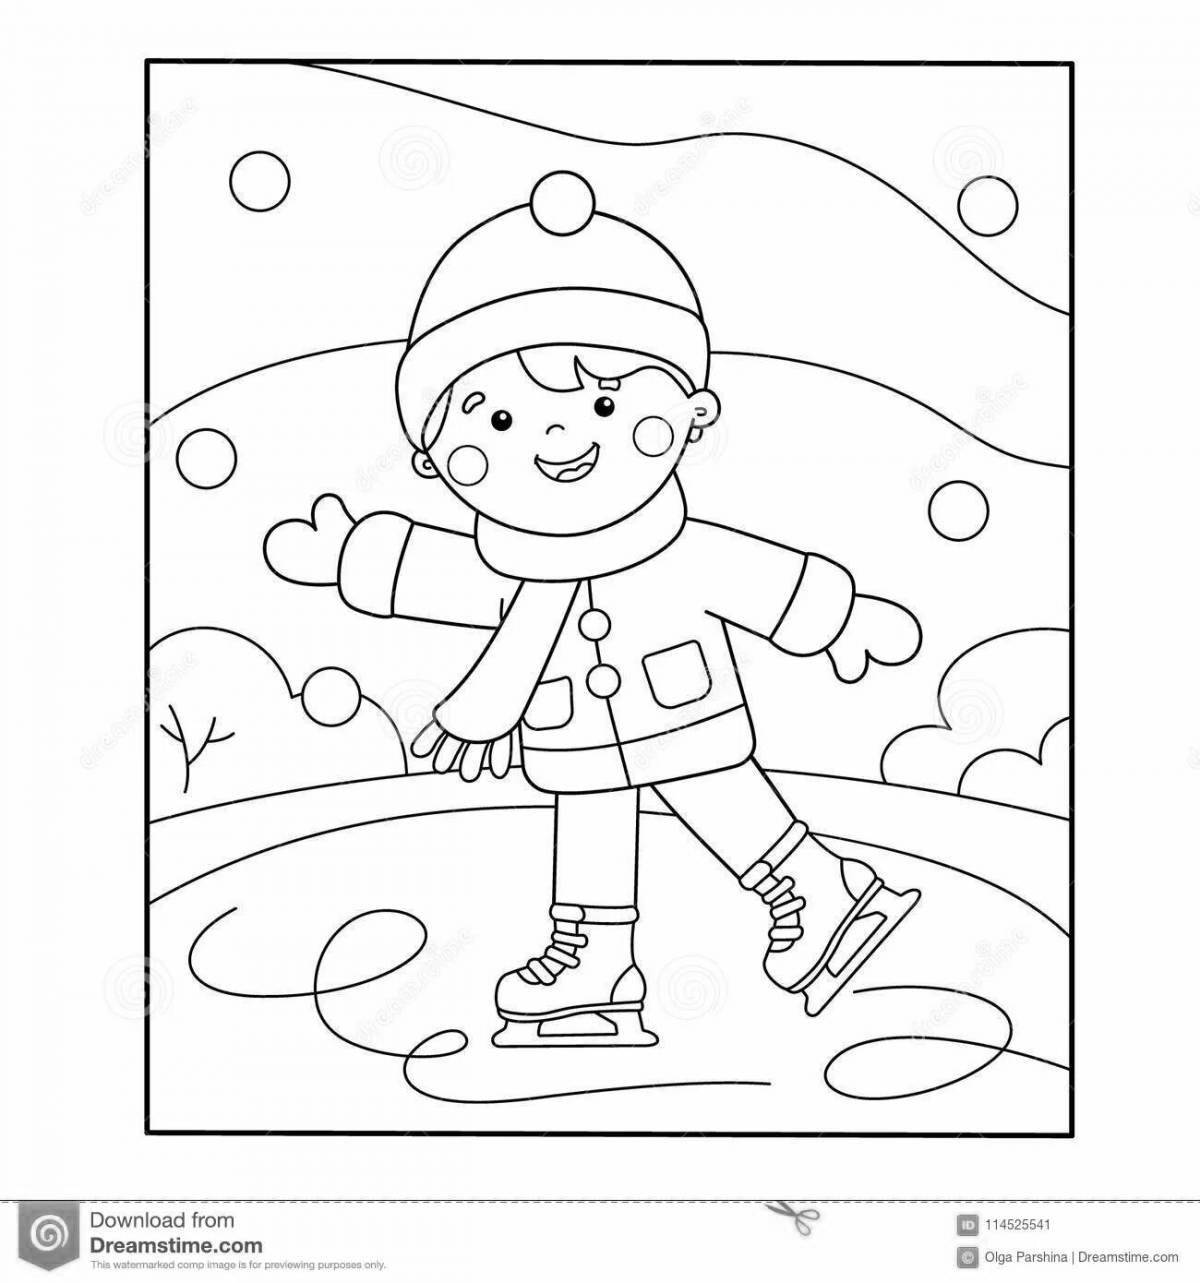 A fun coloring book for kids about winter sports